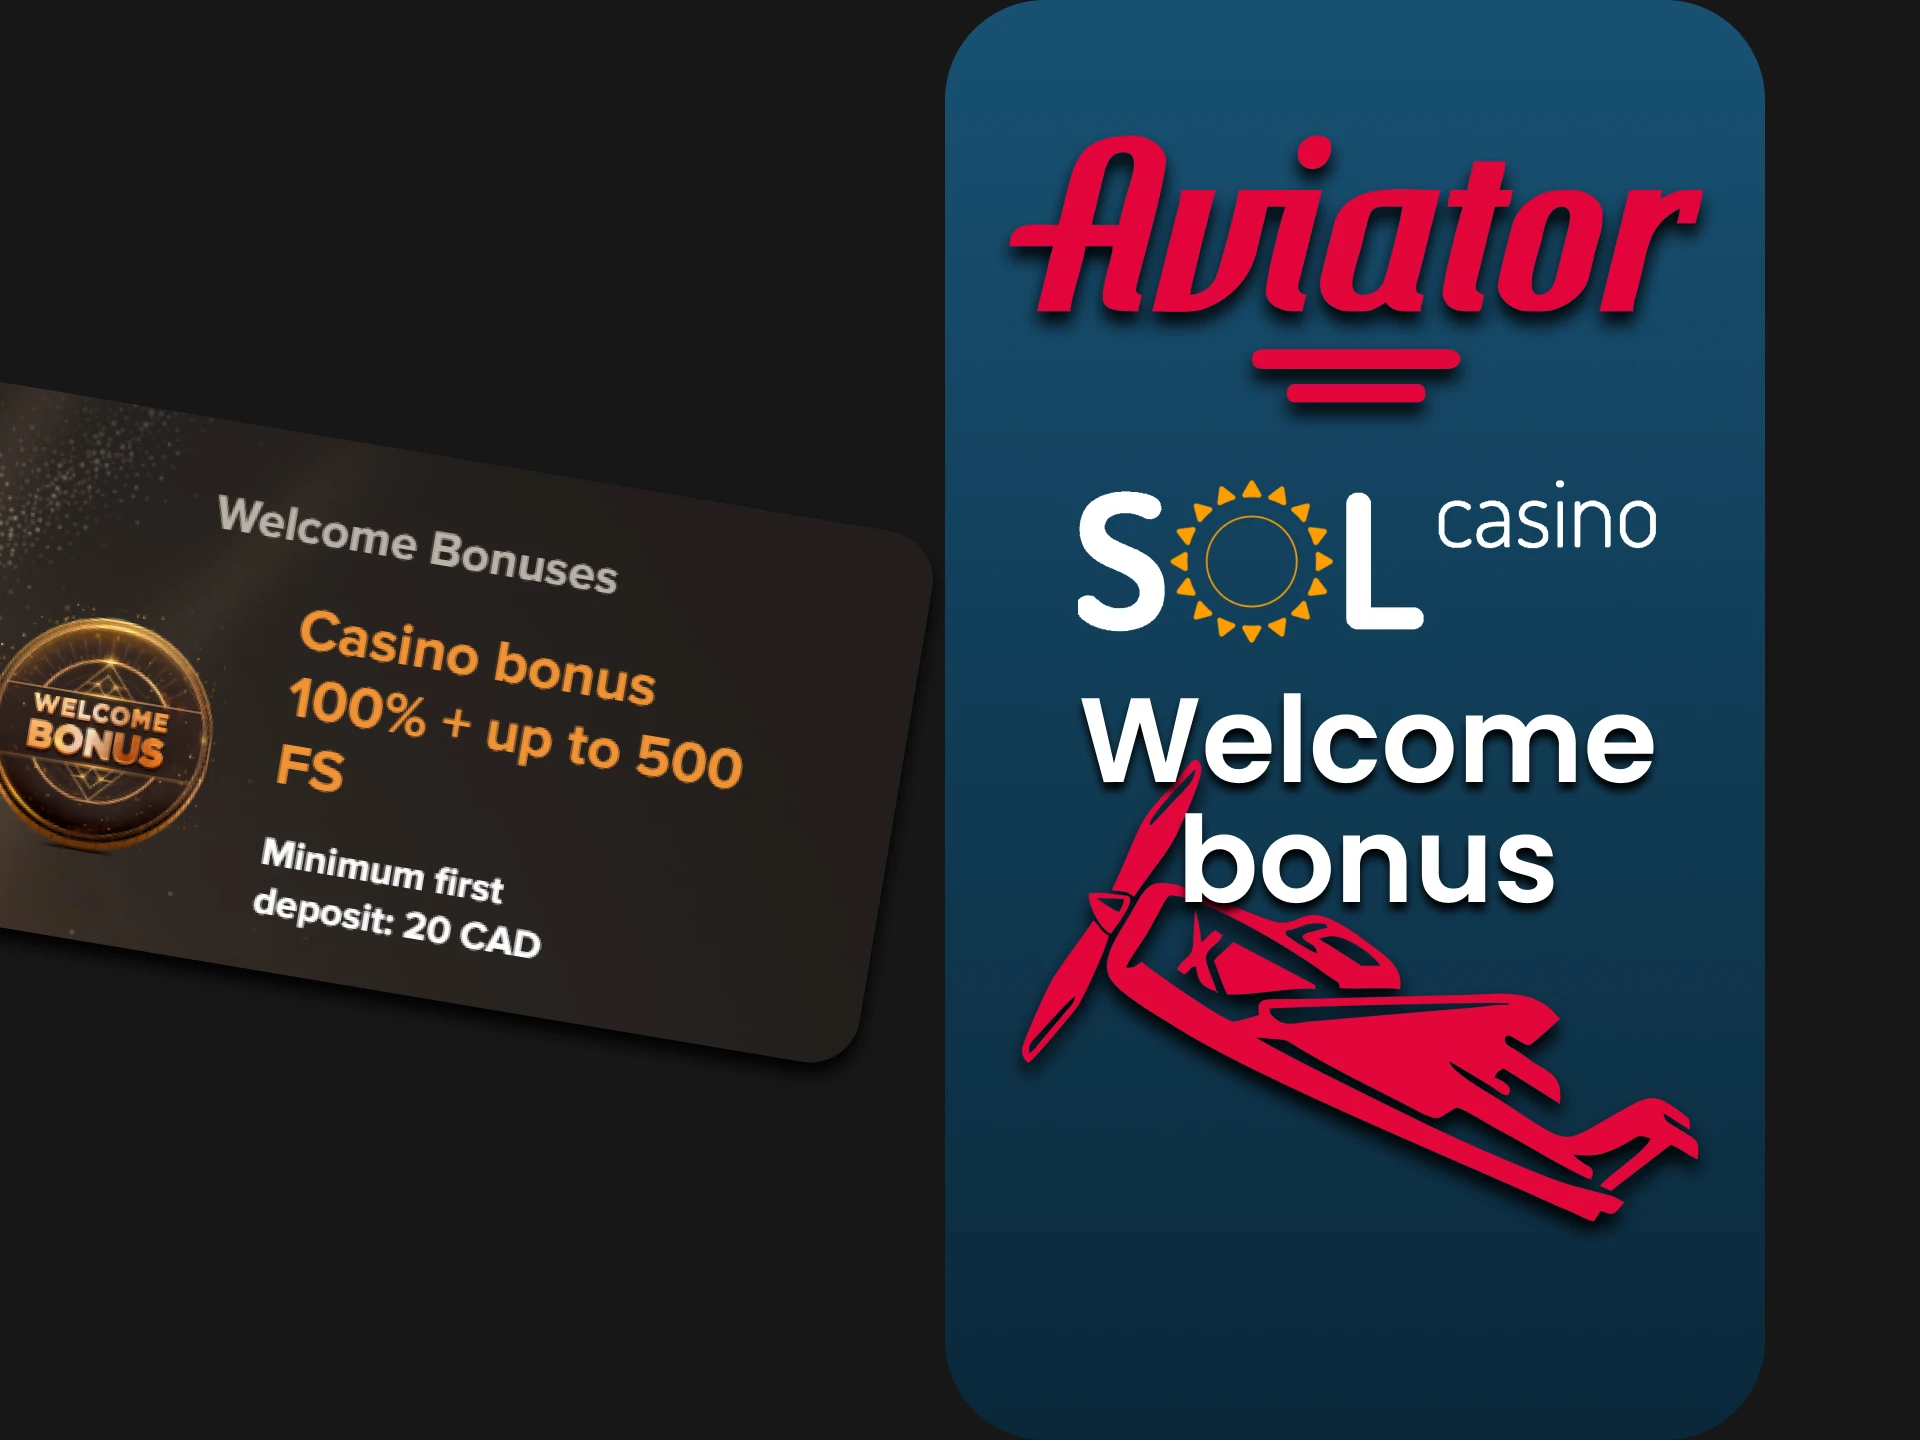 Sol Casino is giving a welcome bonus to the Aviator.